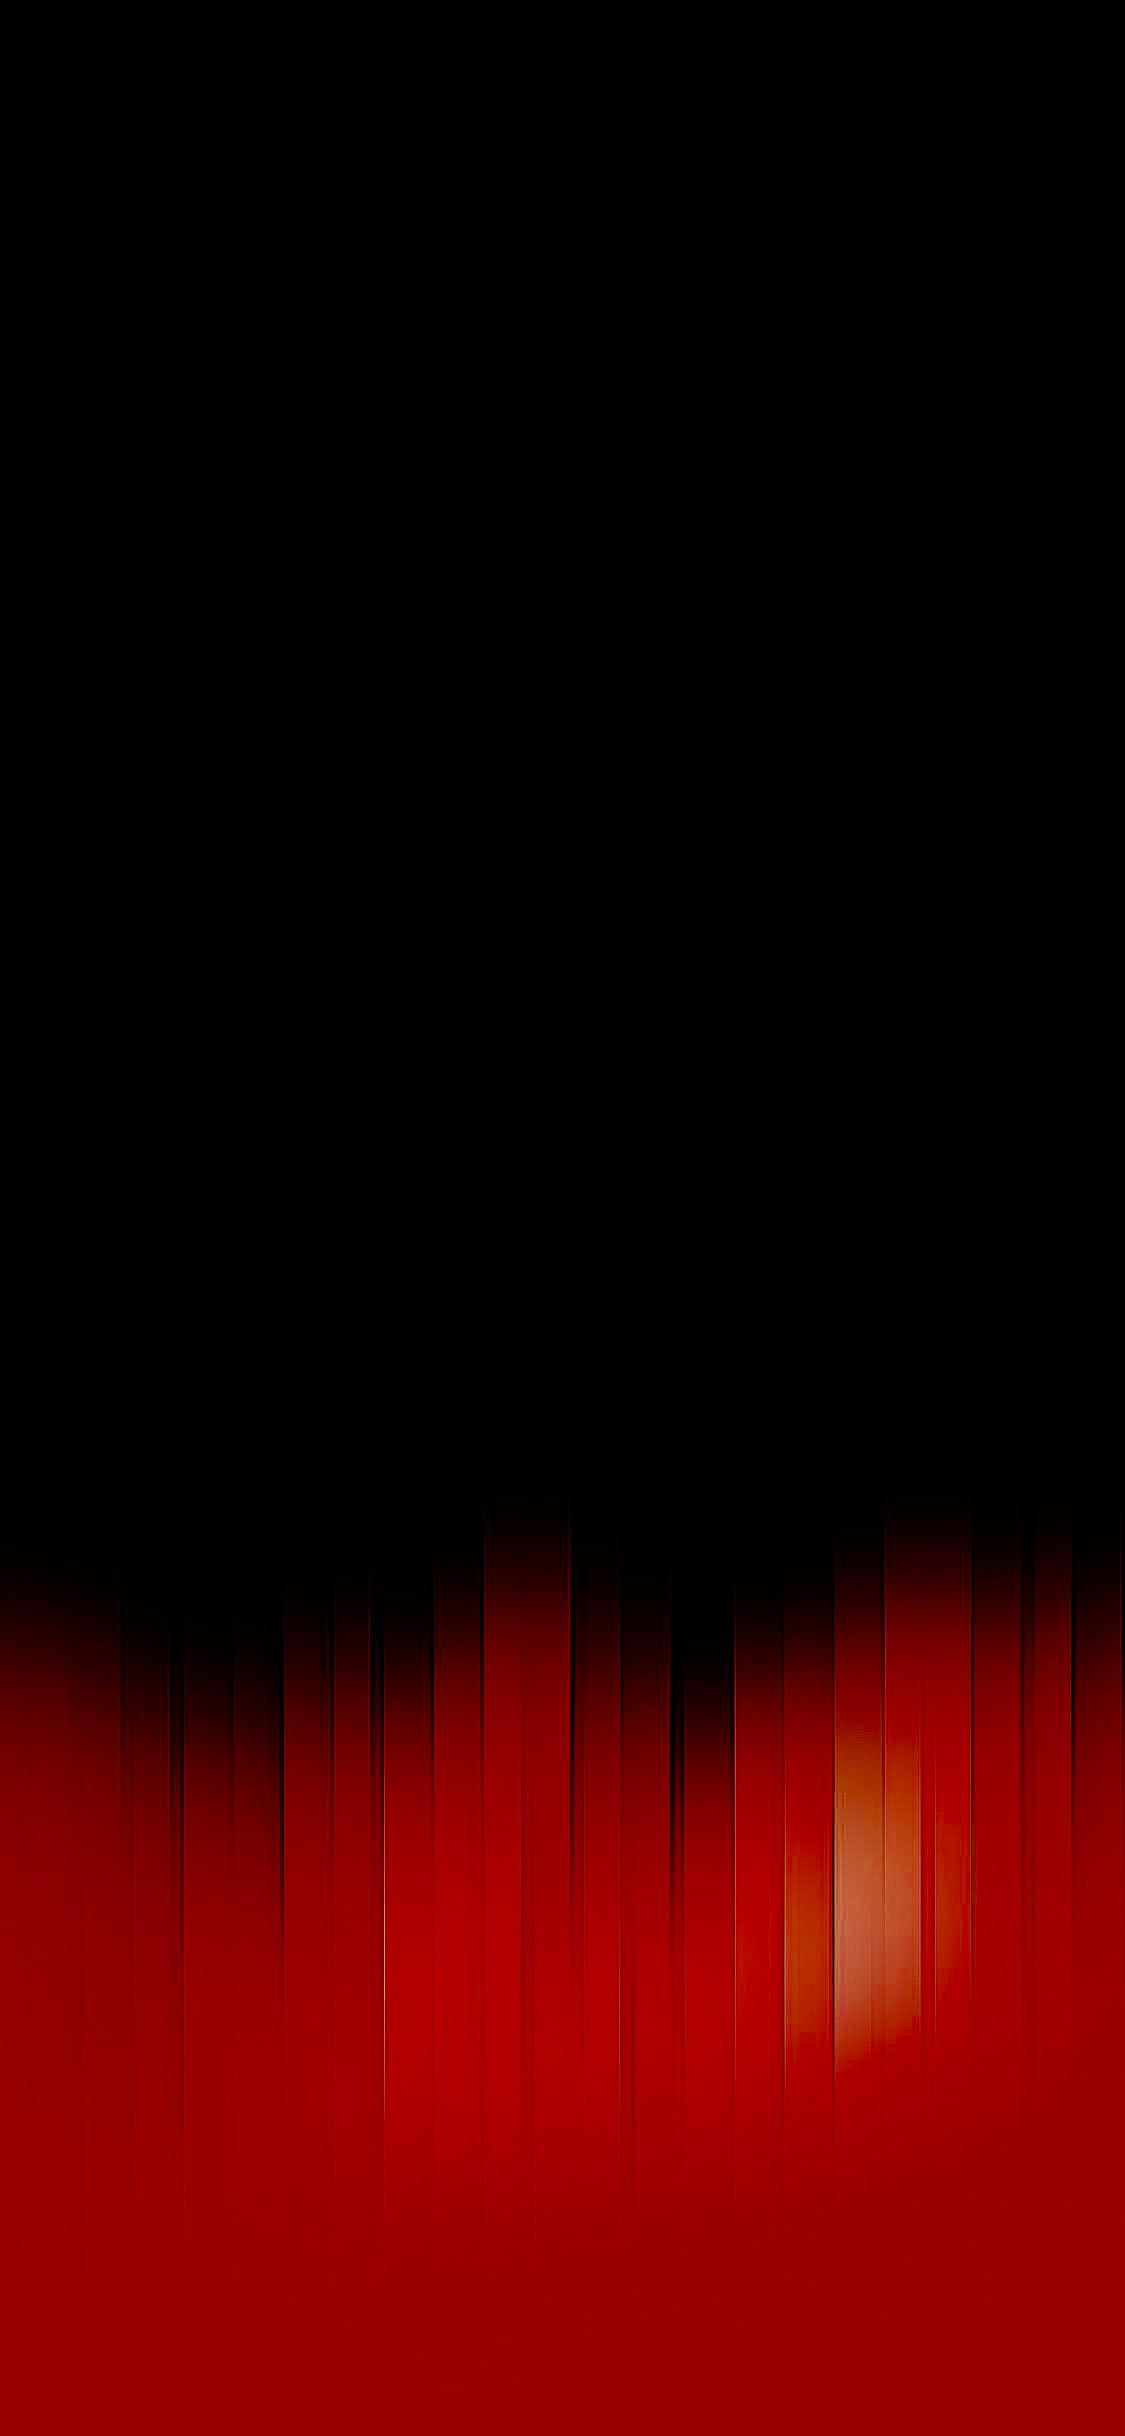 Does anyone know how best to make a “black wallpaper” into “true black” for the OLED iPhones?